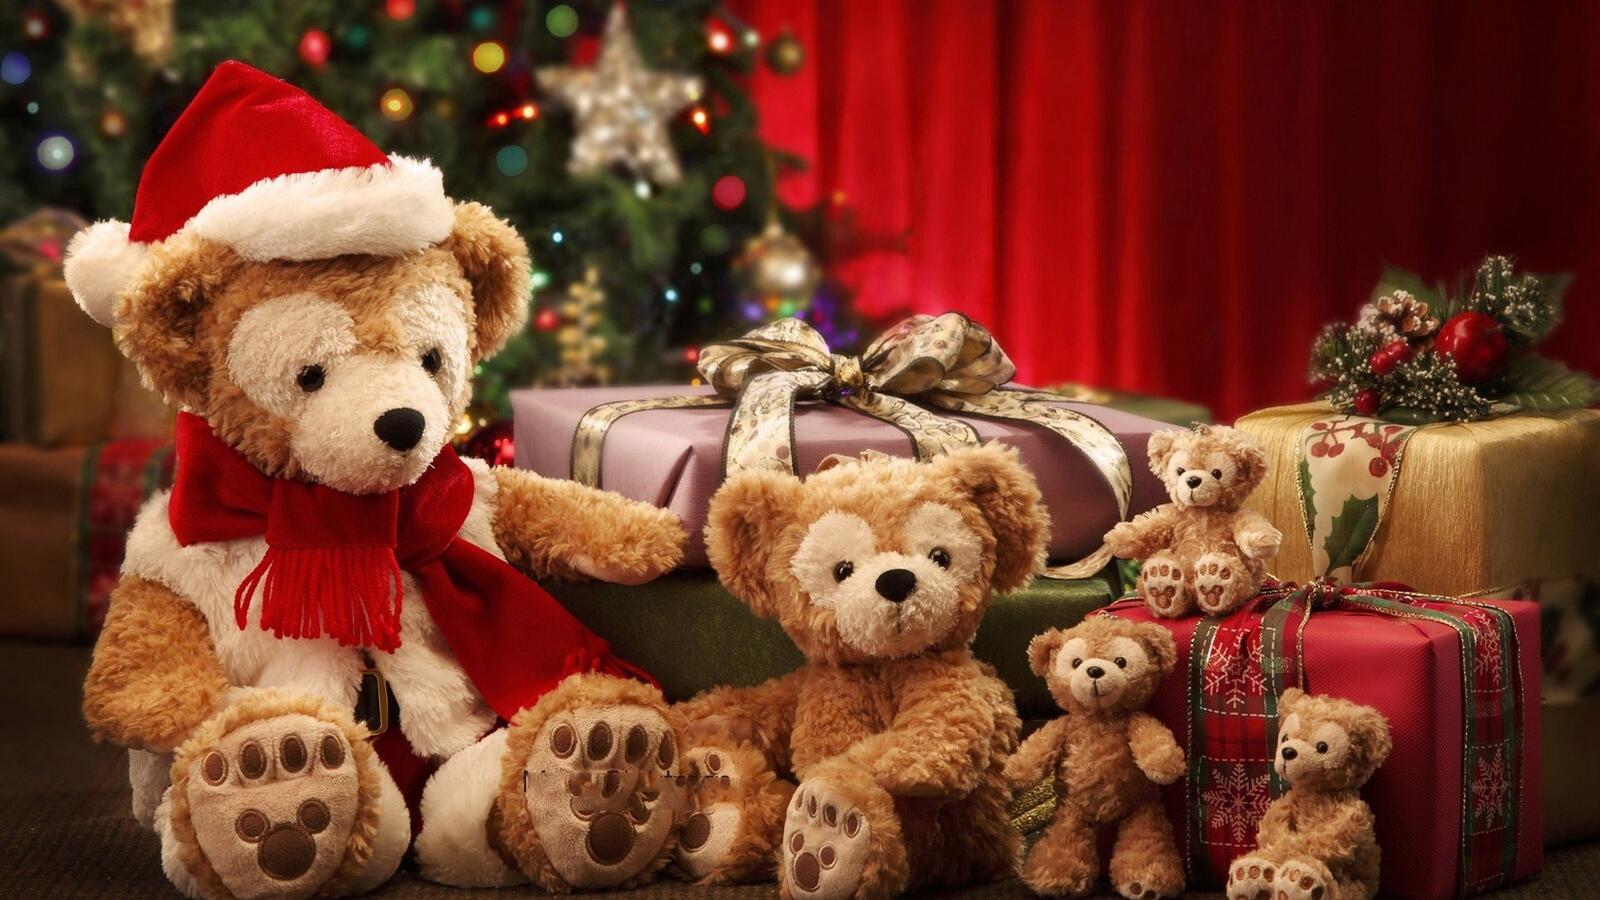 Wallpapers plush bear holiday cuddly toy on the desktop